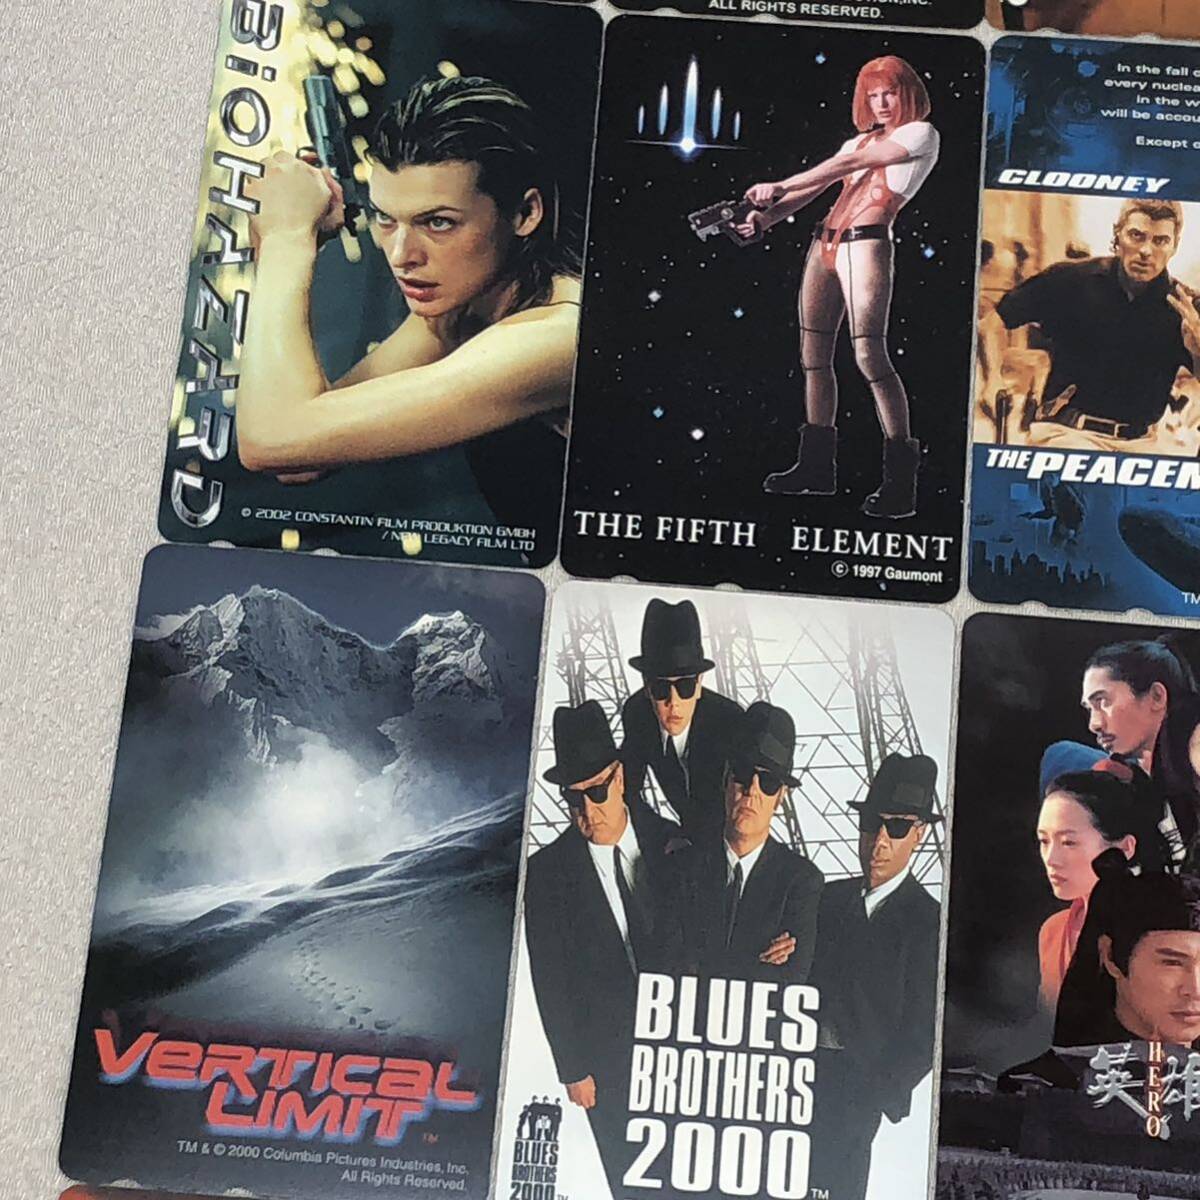 6 unused telephone card 50 frequency 30 pieces set Western films movie collection goods large hard Vaio hazard taxi 2 Ocean z11 etc. 